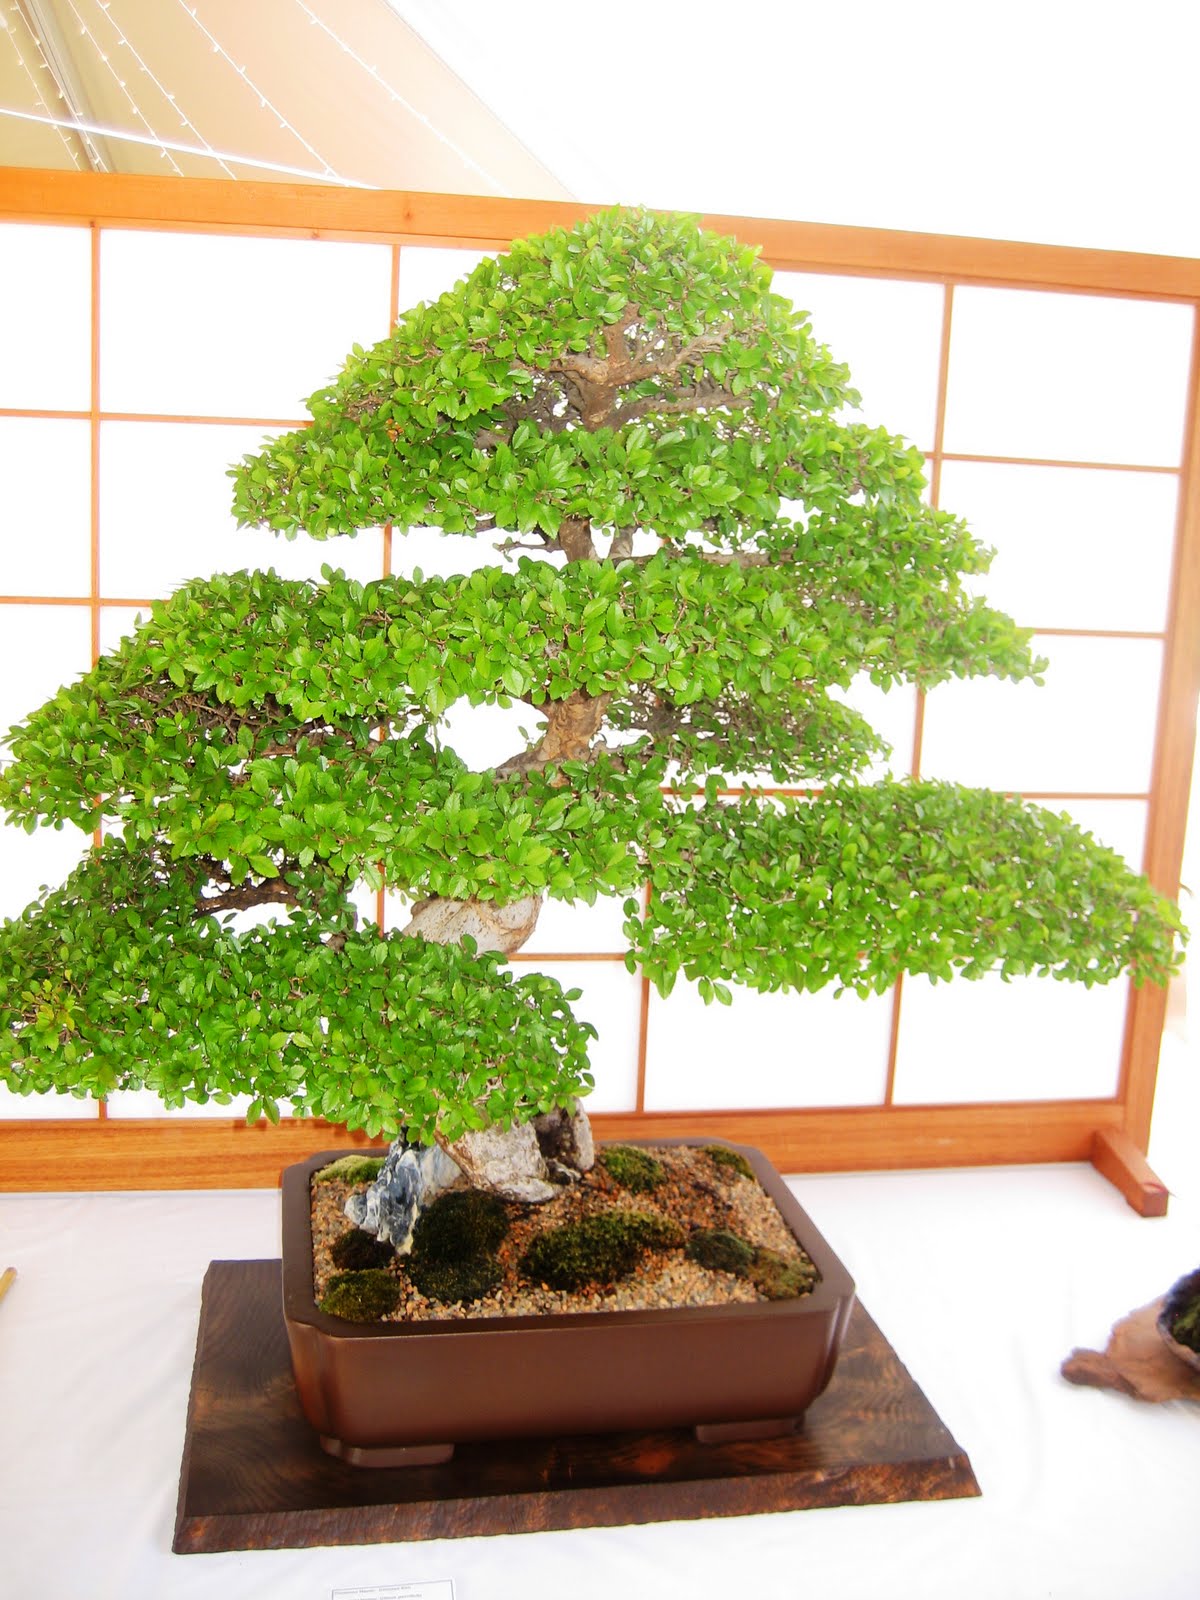 The is Chewing Gum for the Eyes Bonsai Bonanza